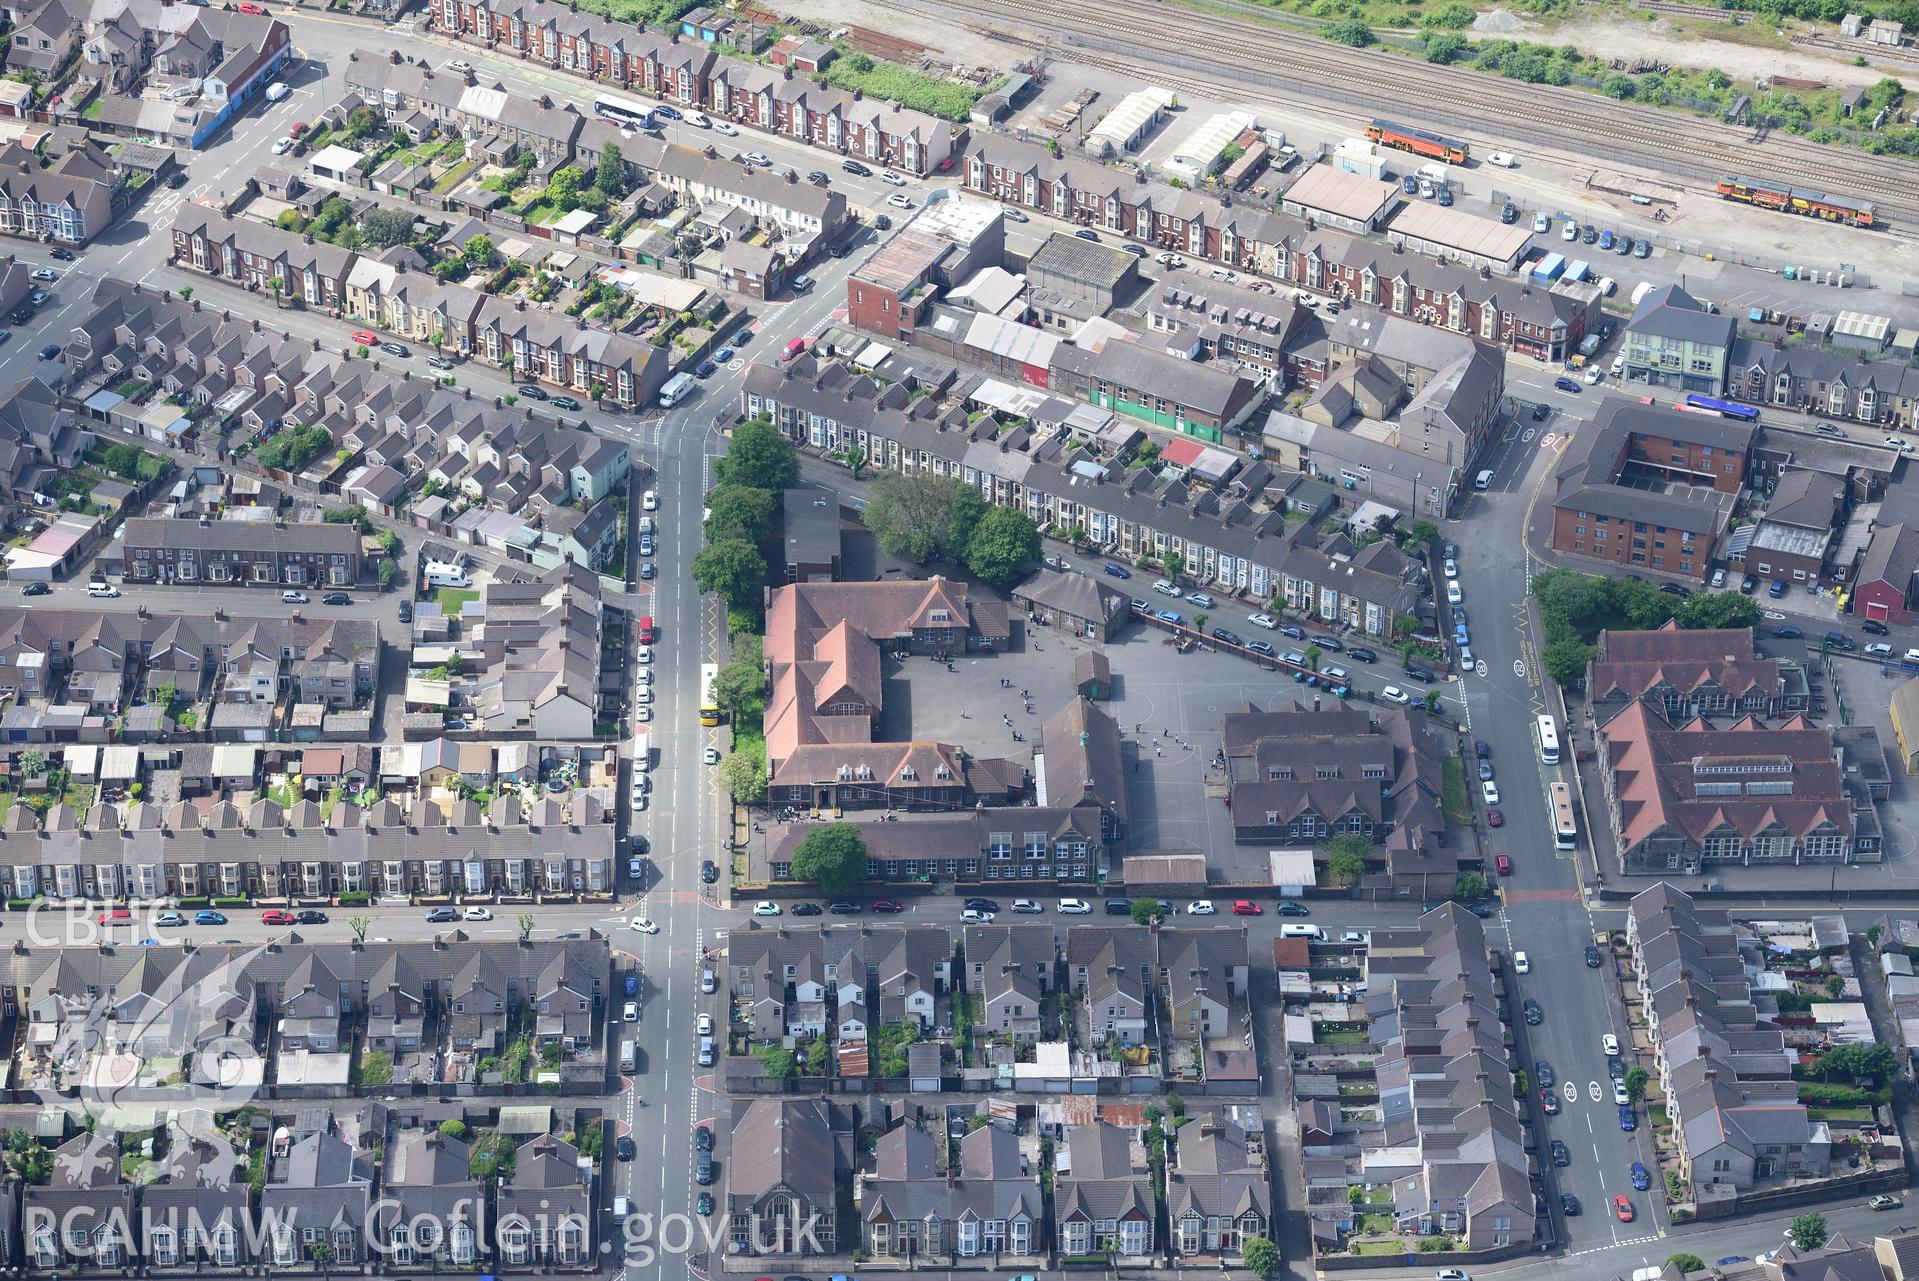 Central Junior school and Dyffryn Comprehensive lower school, with Grange Street Independent Chapel at Port Talbot. Oblique aerial photograph taken during the Royal Commission's programme of archaeological aerial reconnaissance by Toby Driver on 19th June 2015.